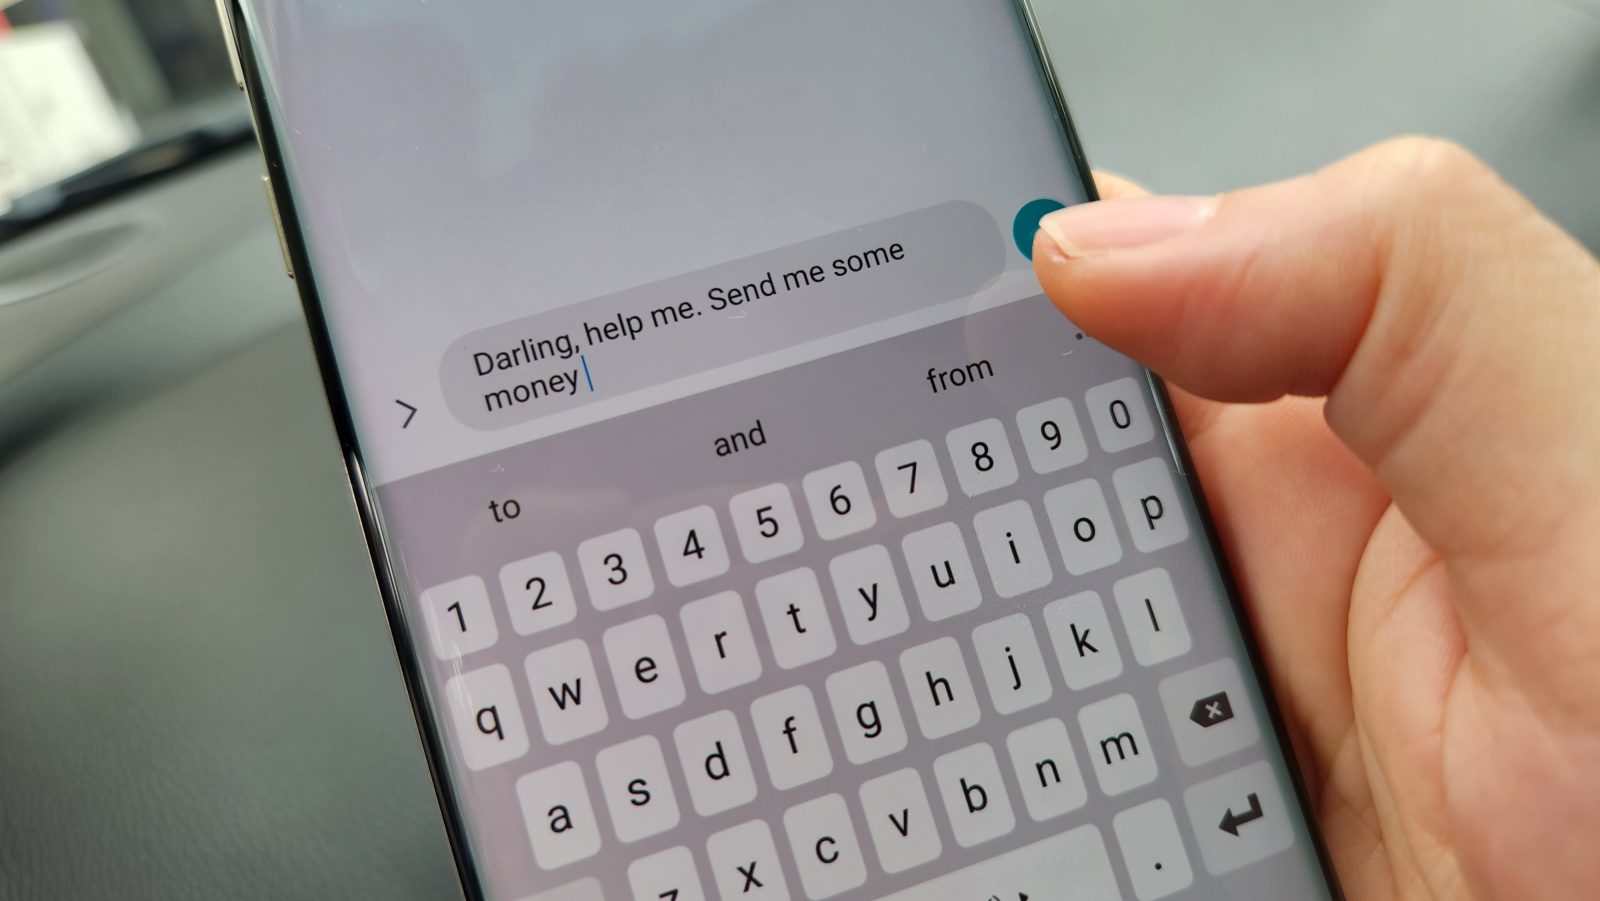 A hand holding a mobile phone with text message showing a potential romance scam.